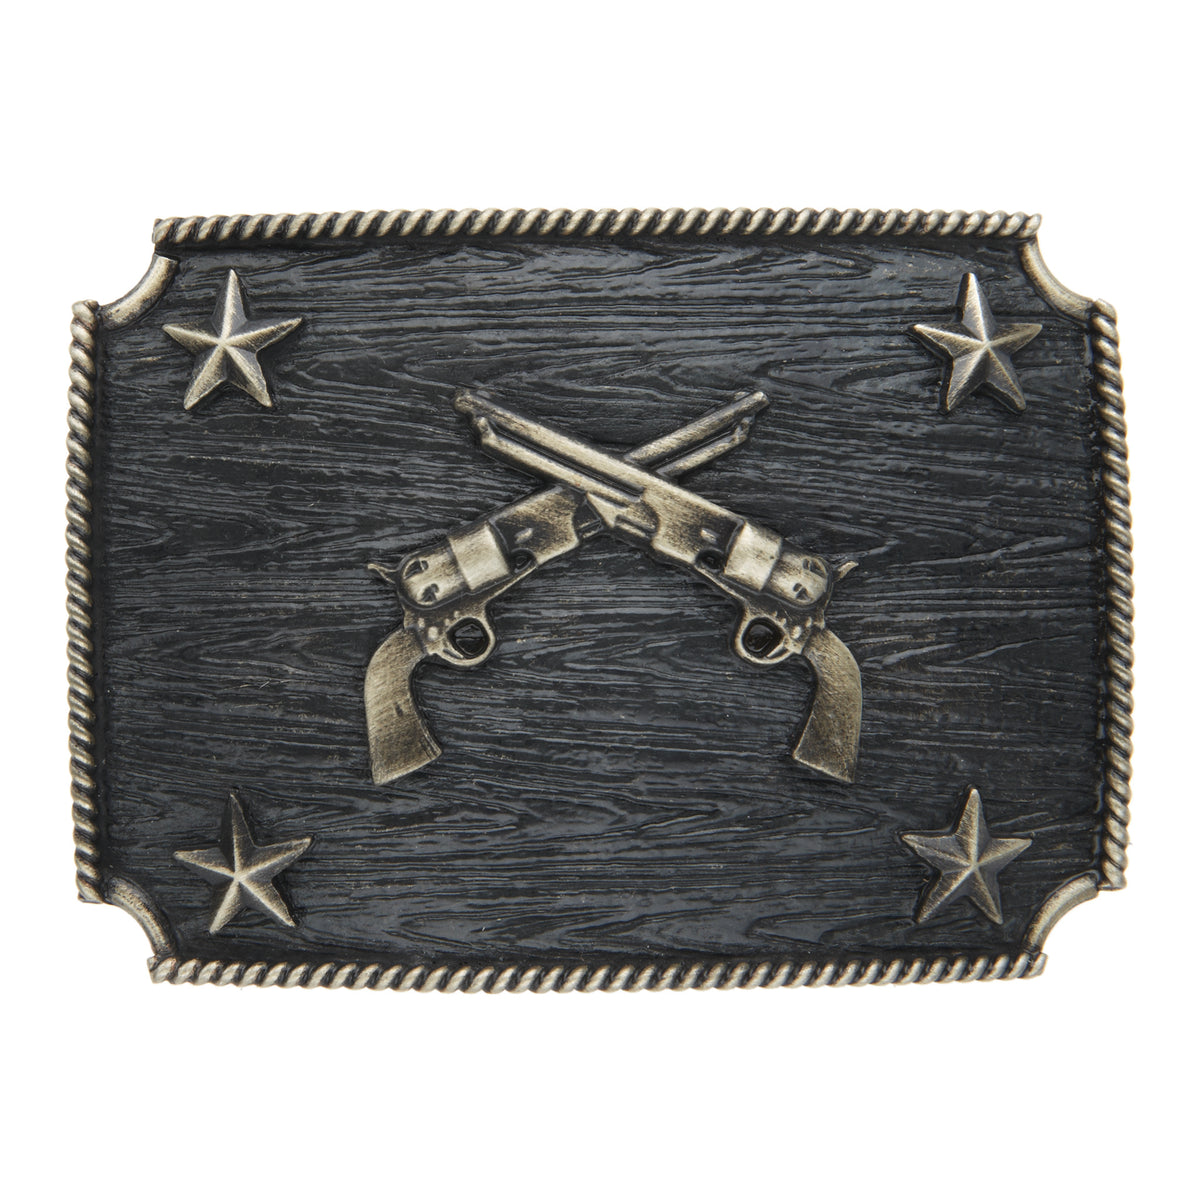 Crossed Pistols with Stars Iconic Classic Buckle